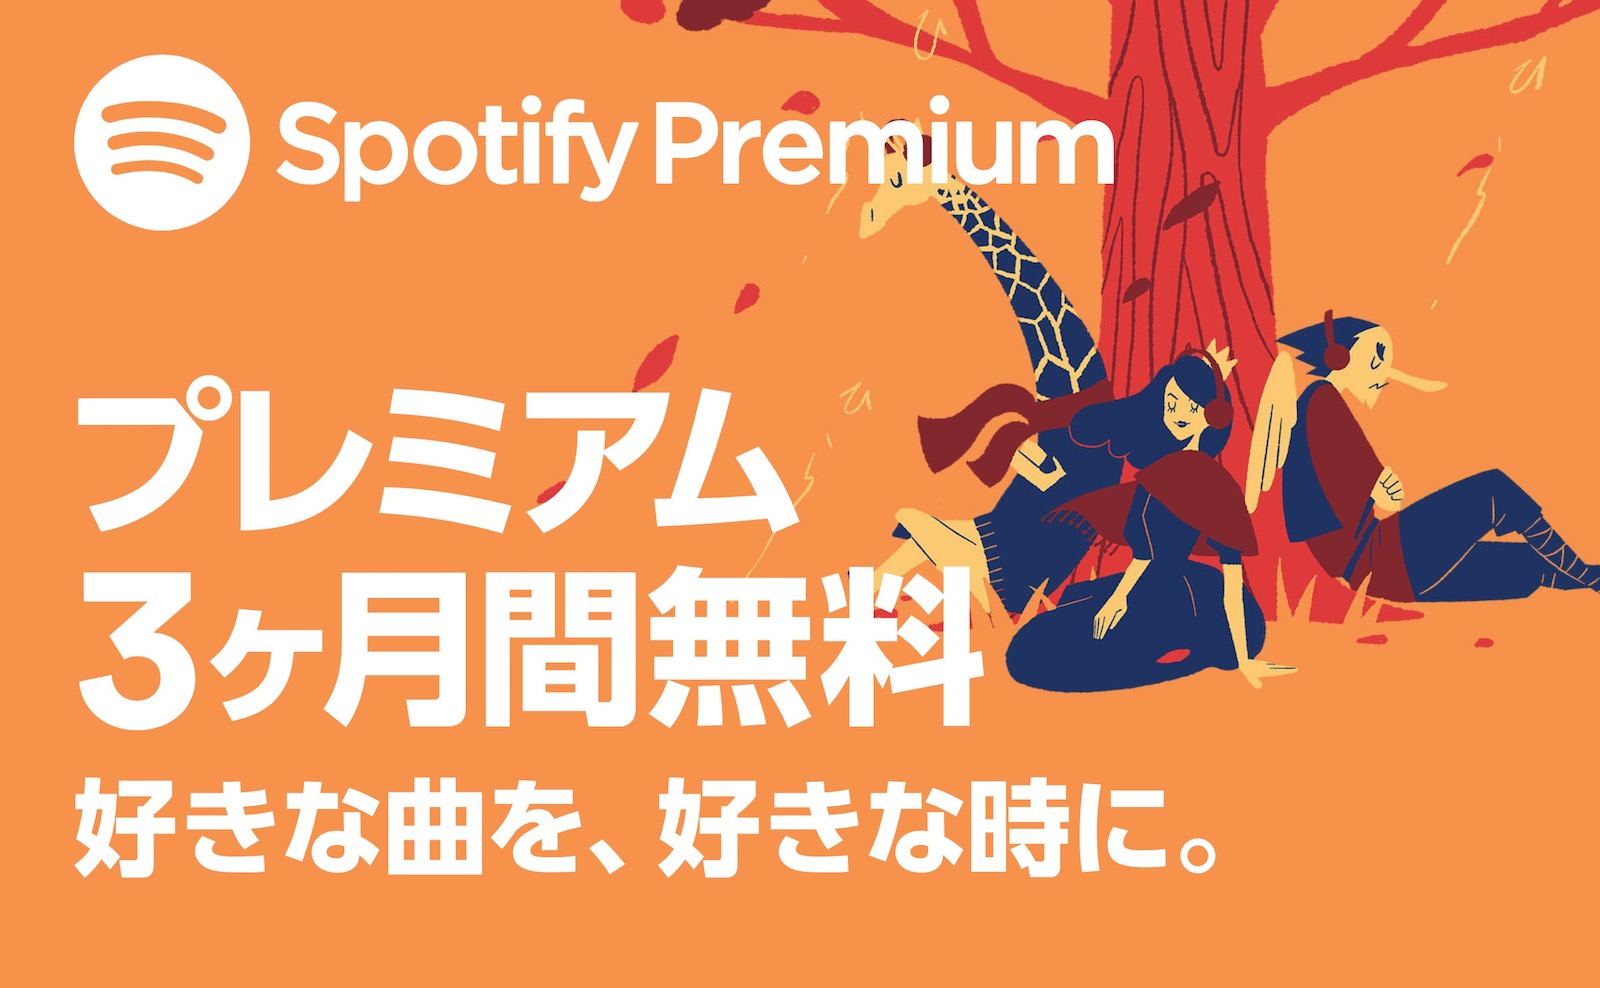 Spotify-Free-Trial-to3months.jpg